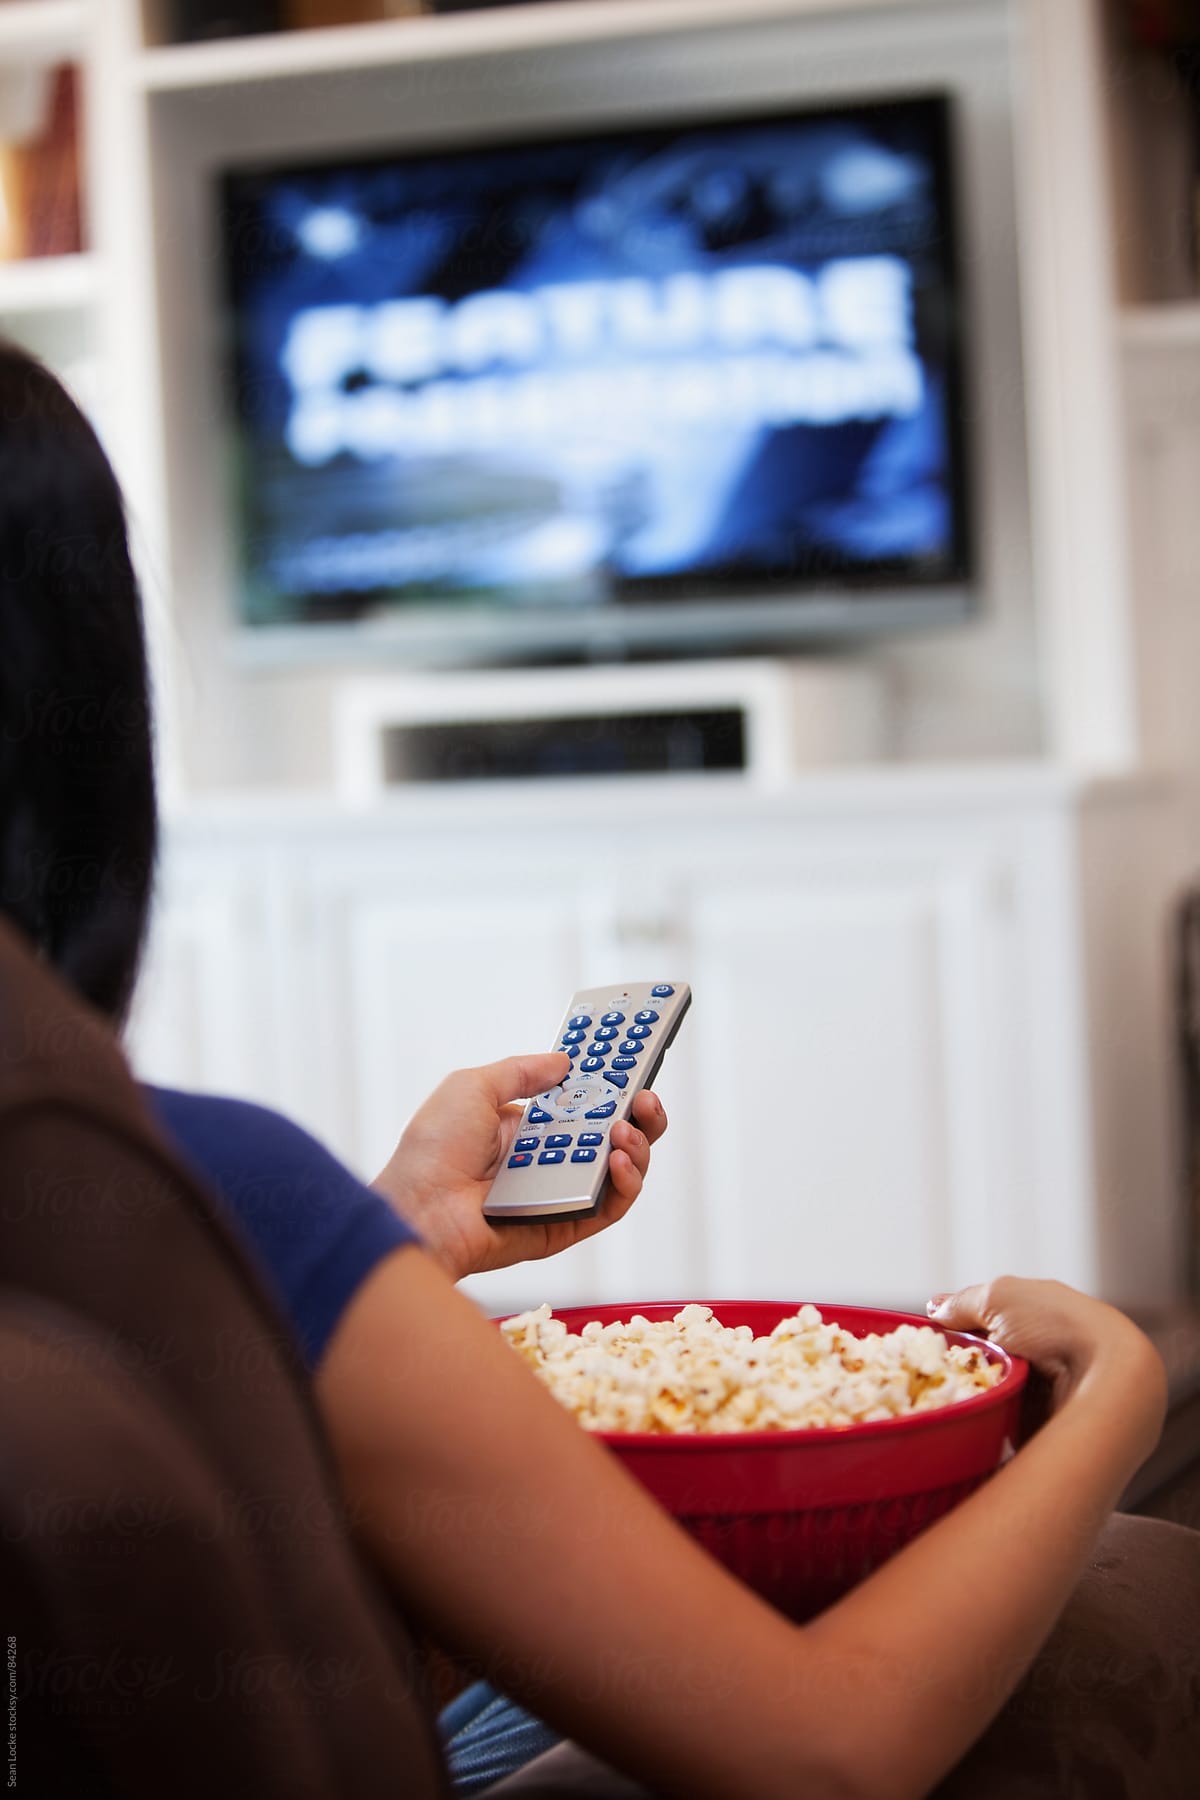 Television: Woman Ready To Watch Movie on Television